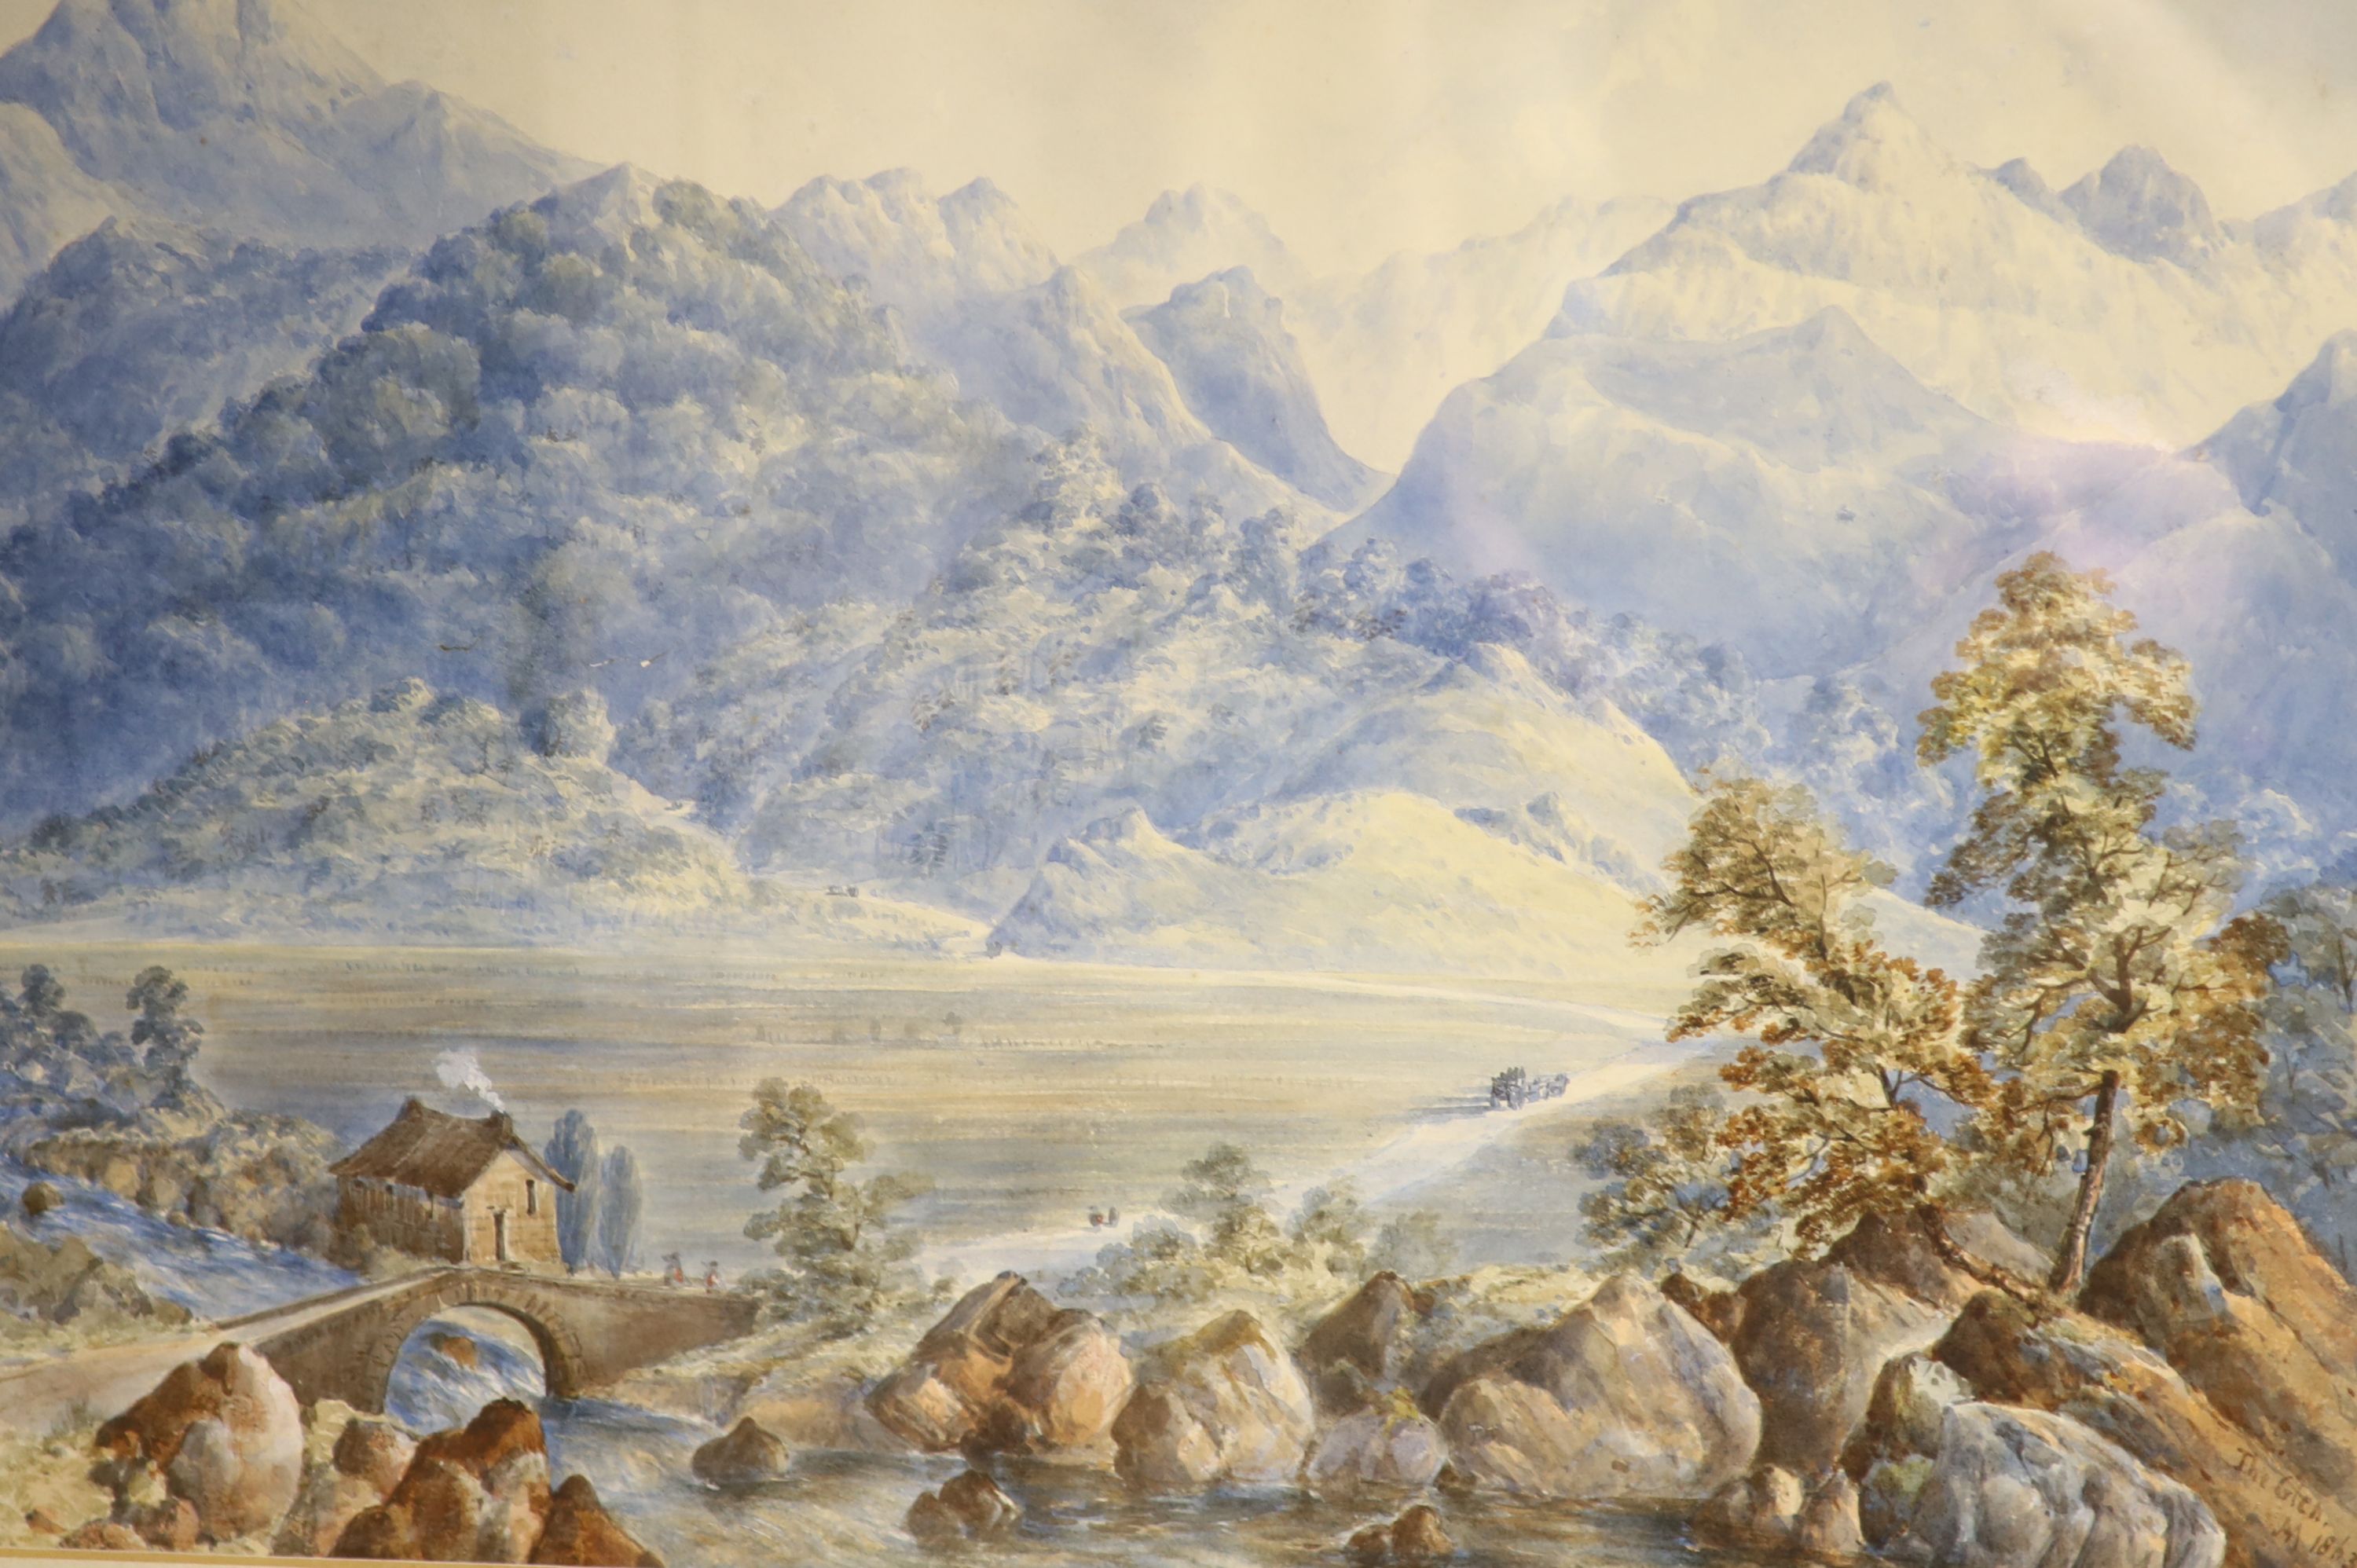 A.M. 19th century, watercolour, The Glen, monogrammed and dated 1863, 31 x 45cm